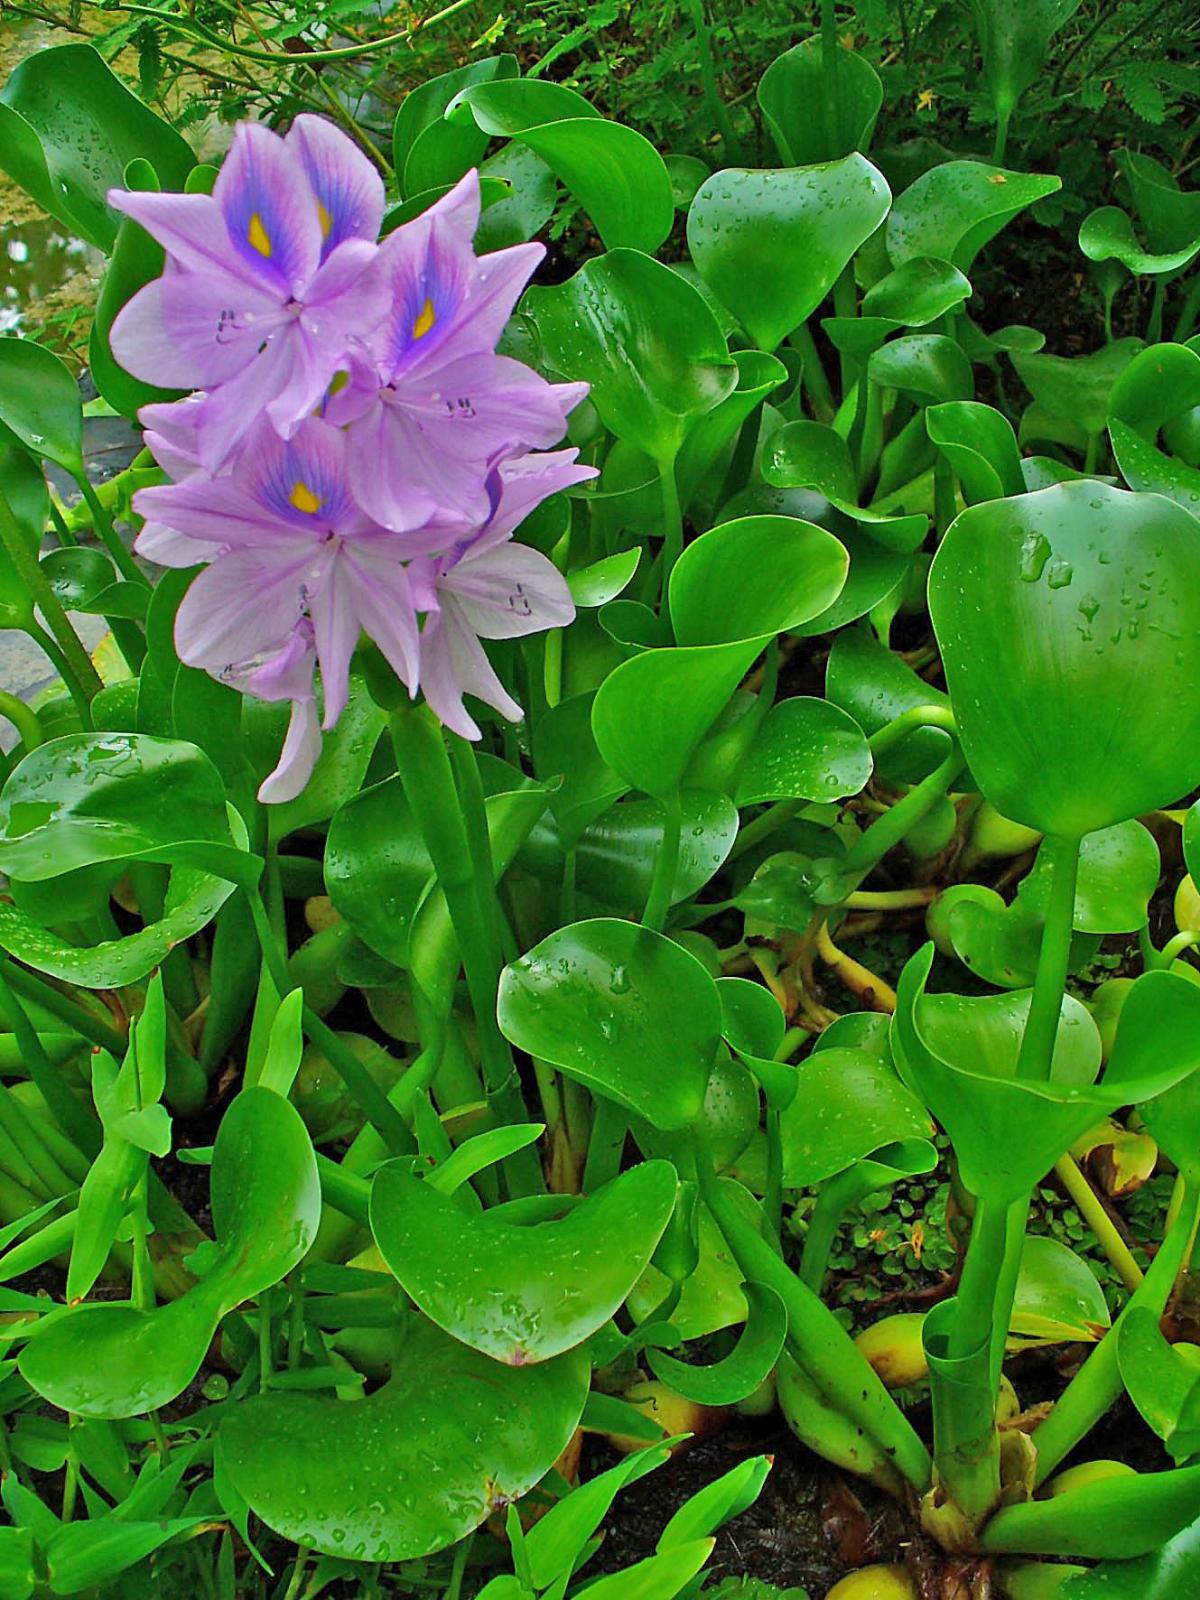 Beo nhat ban (Eichhornia crassipes Solms)